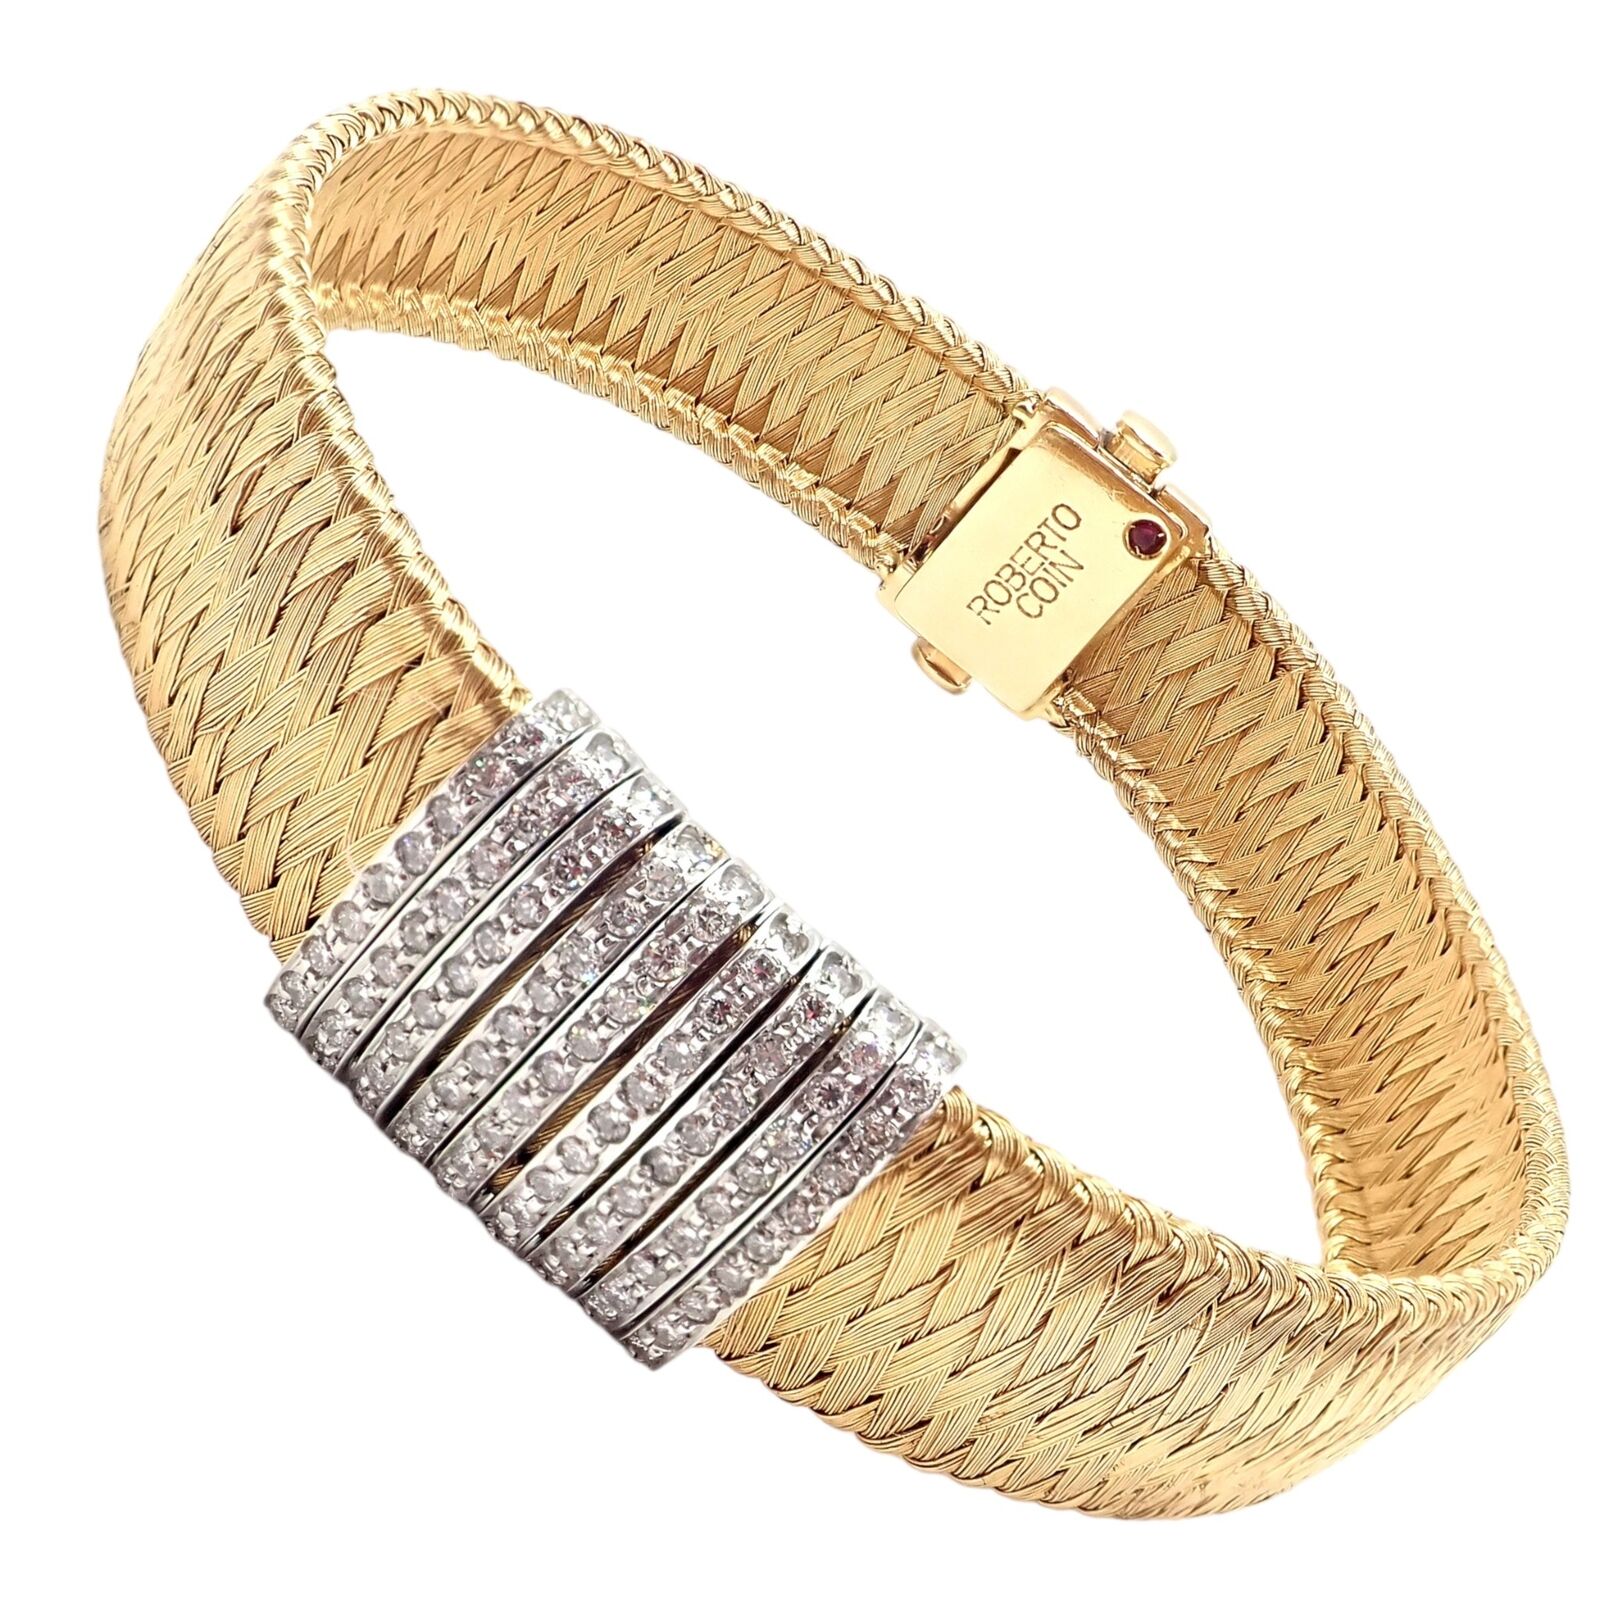 Roberto Coin Jewelry & Watches:Fine Jewelry:Bracelets & Charms Authentic! Roberto Coin 18k Yellow Gold 9 Row Diamond Silk Weave Bracelet